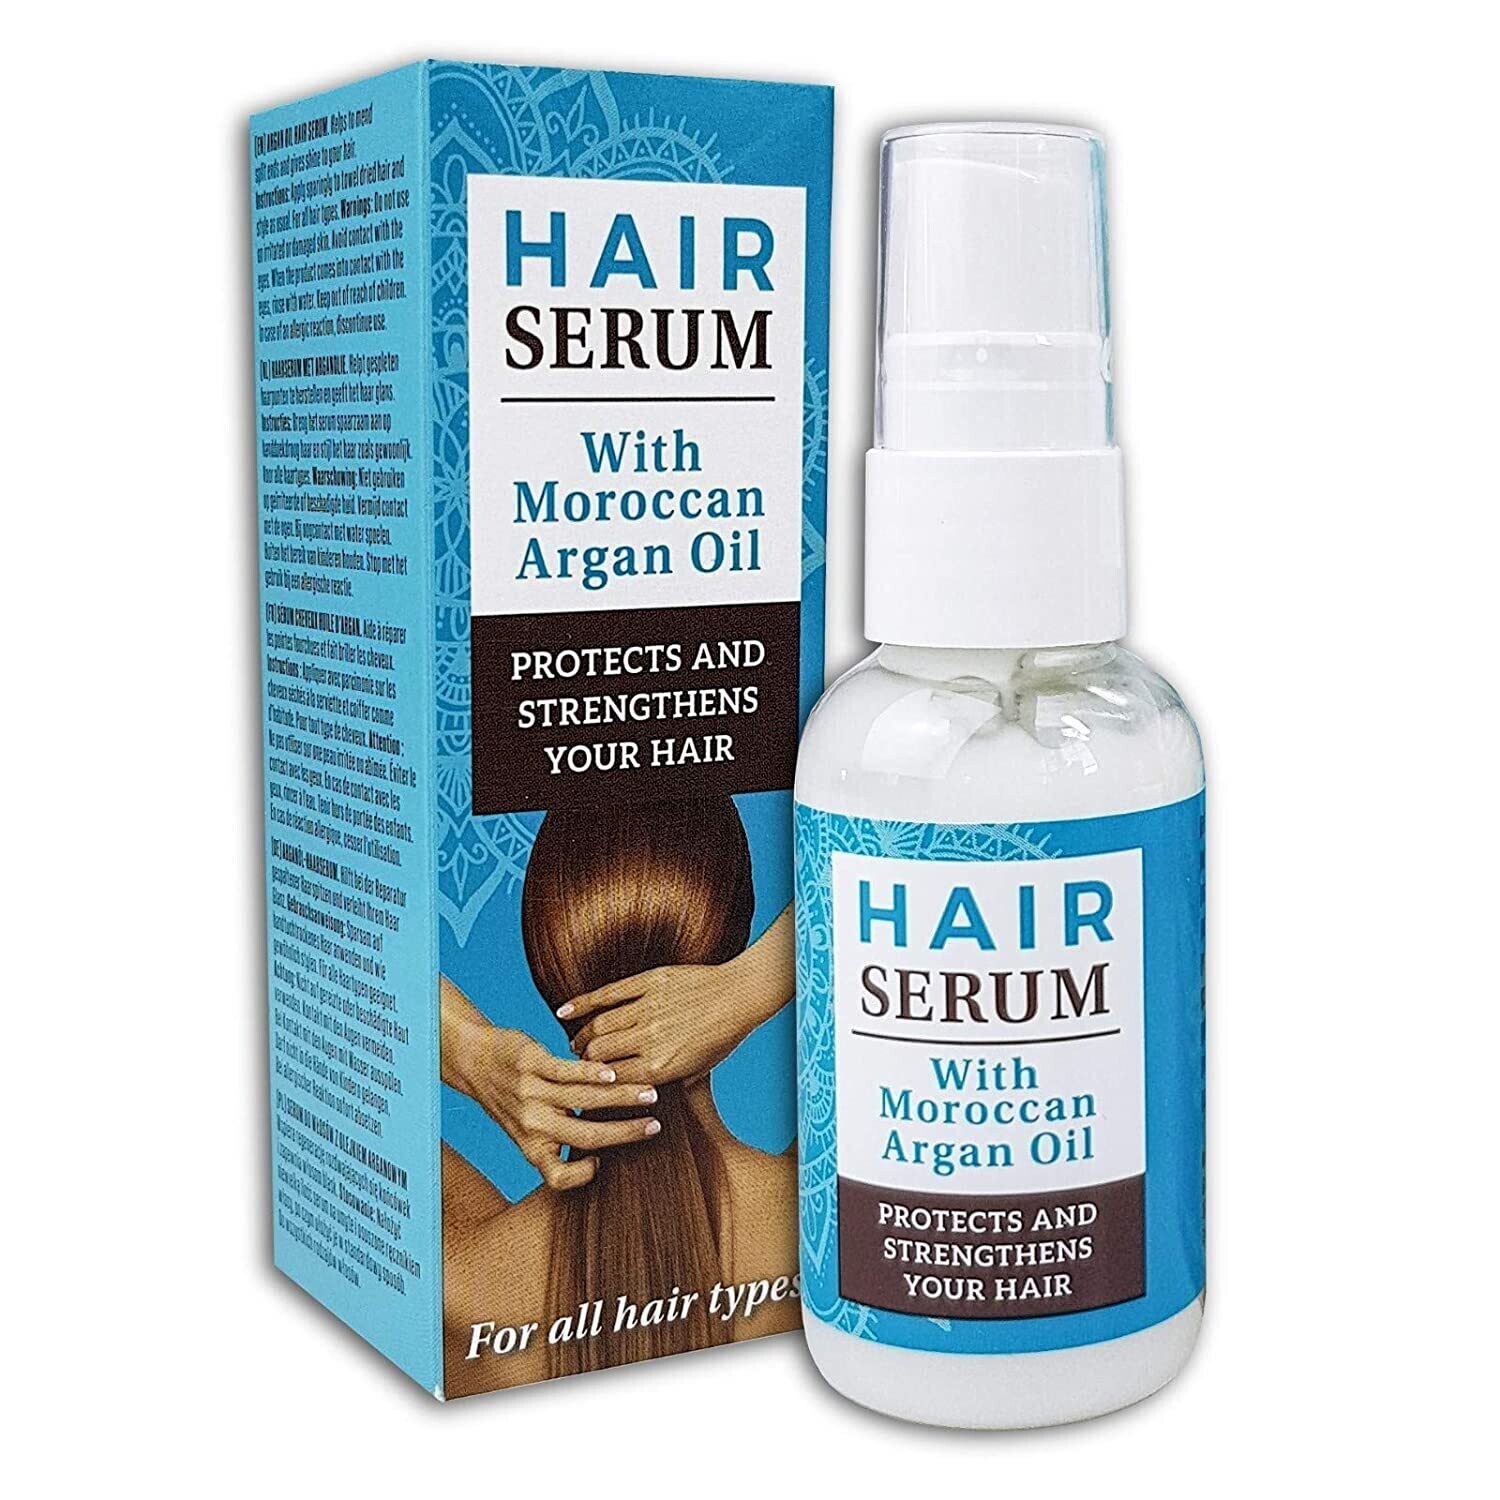 Mascot Moroccan Argan Oil Protects and Strengthens Hair Serum for All Hair Types